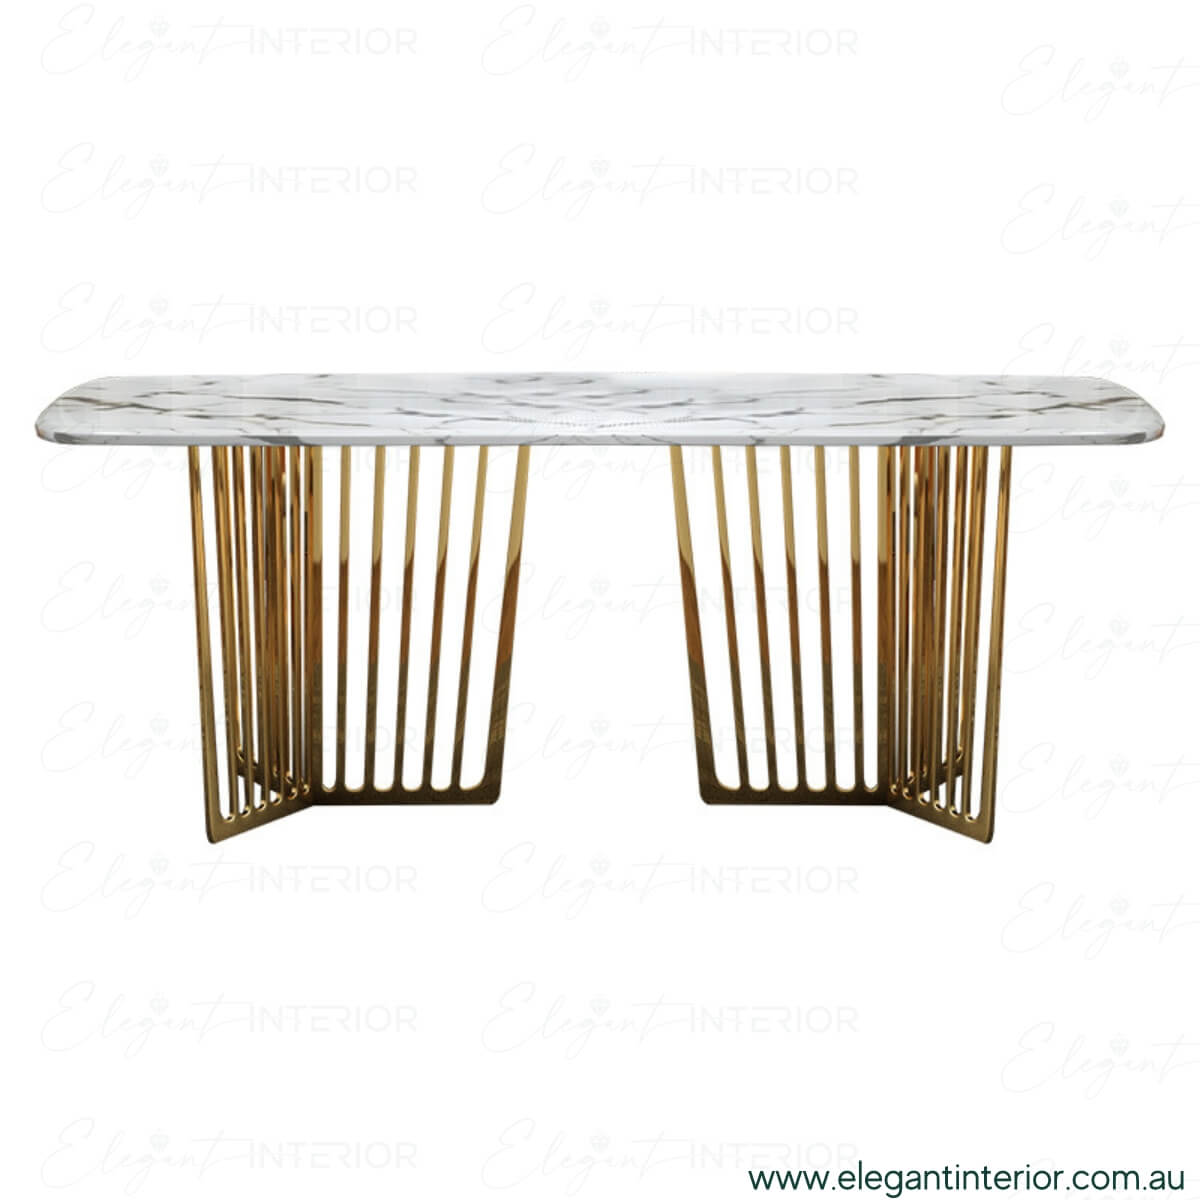 Frances-Marble Dining Table with Stainless Steel Base